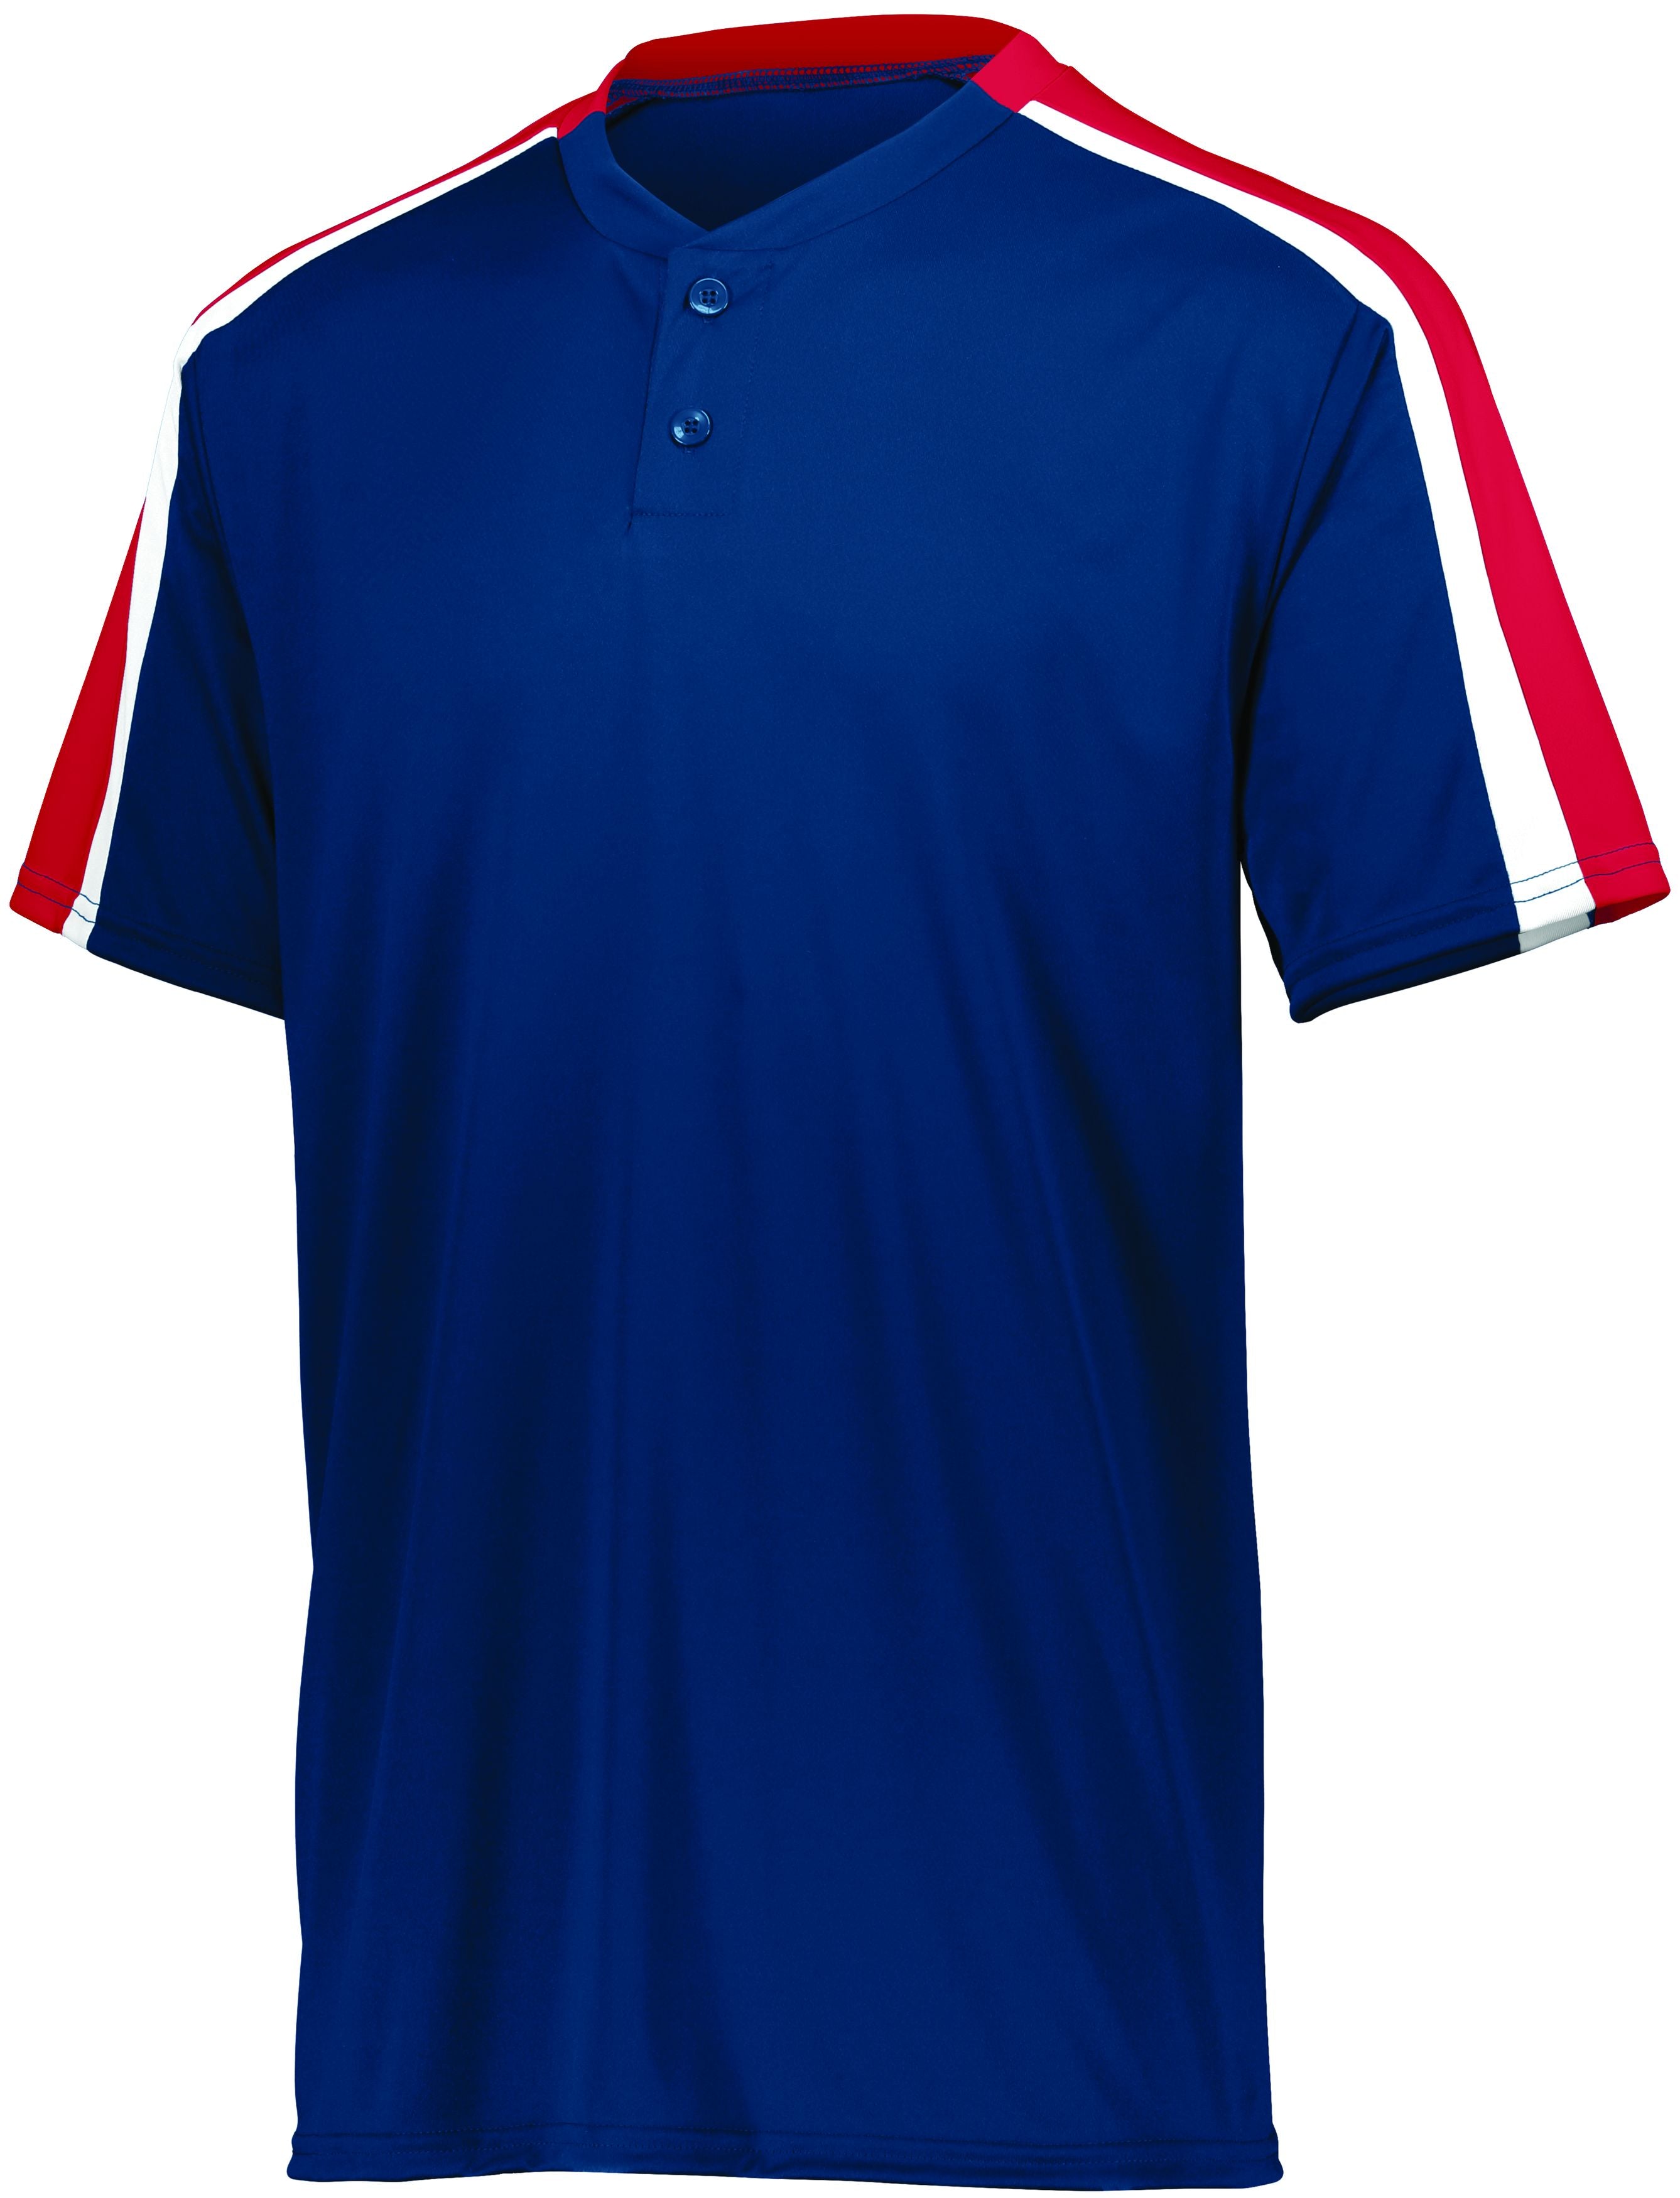 Augusta Sportswear Power Plus Jersey 2.0 in Navy/Red/White  -Part of the Adult, Adult-Jersey, Augusta-Products, Baseball, Shirts, All-Sports, All-Sports-1 product lines at KanaleyCreations.com